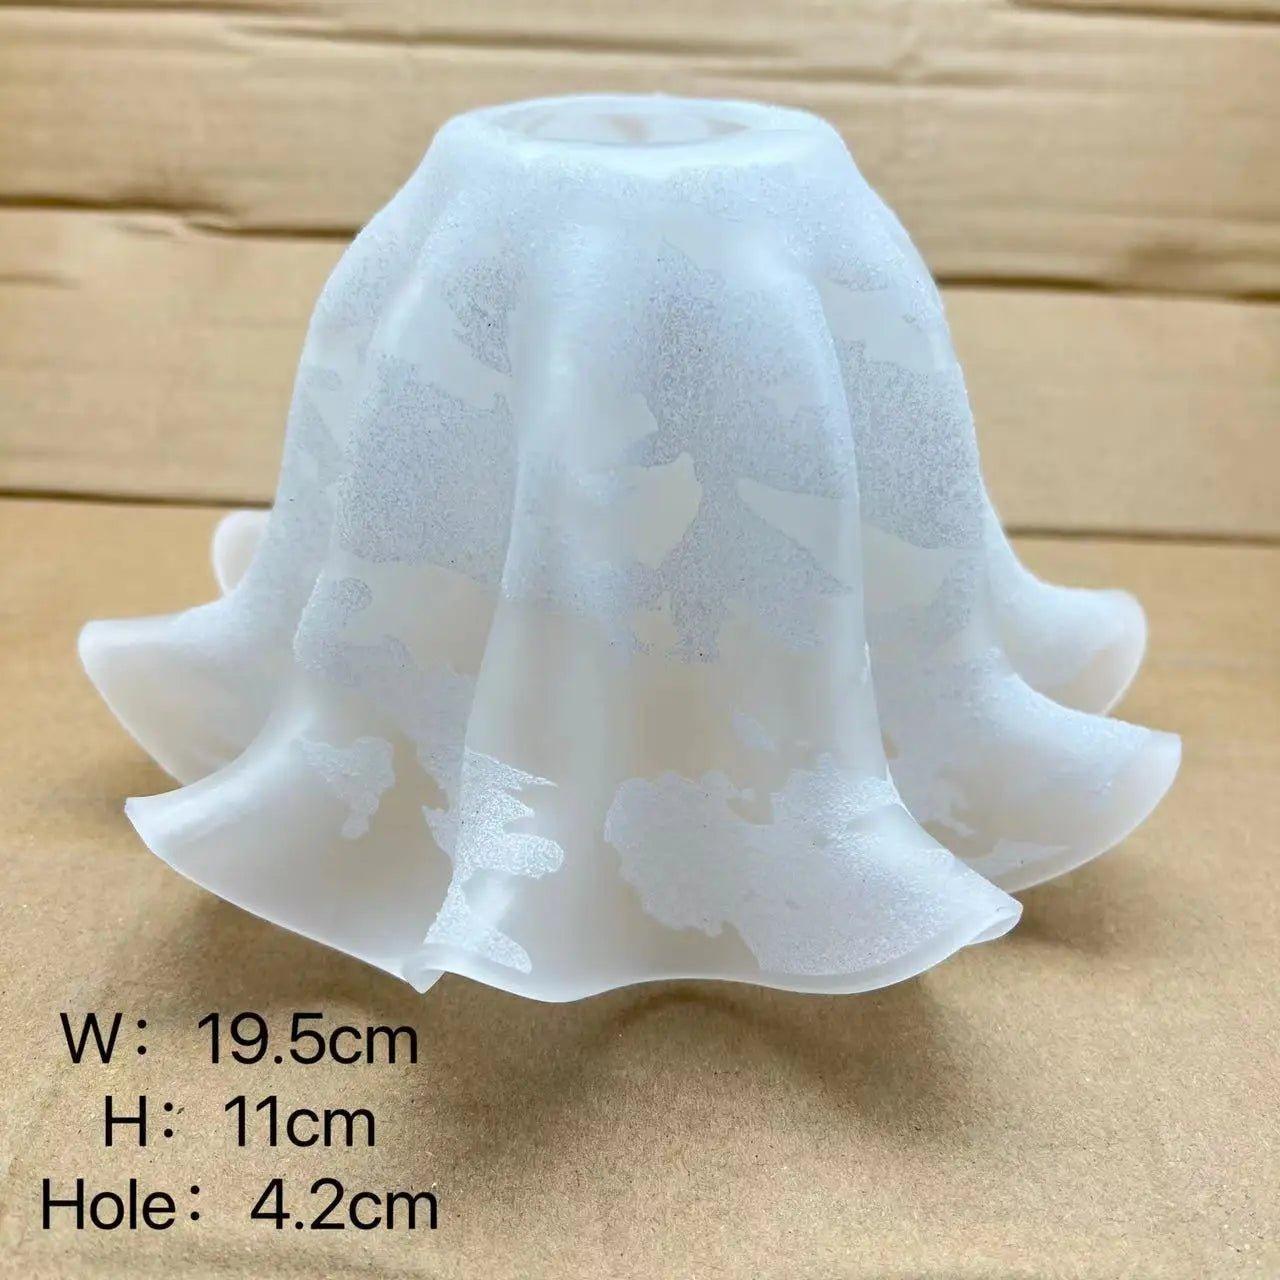 66268 - Glass Lamp Shade Replacement Lamp Cover Frosted - Specialty Shades